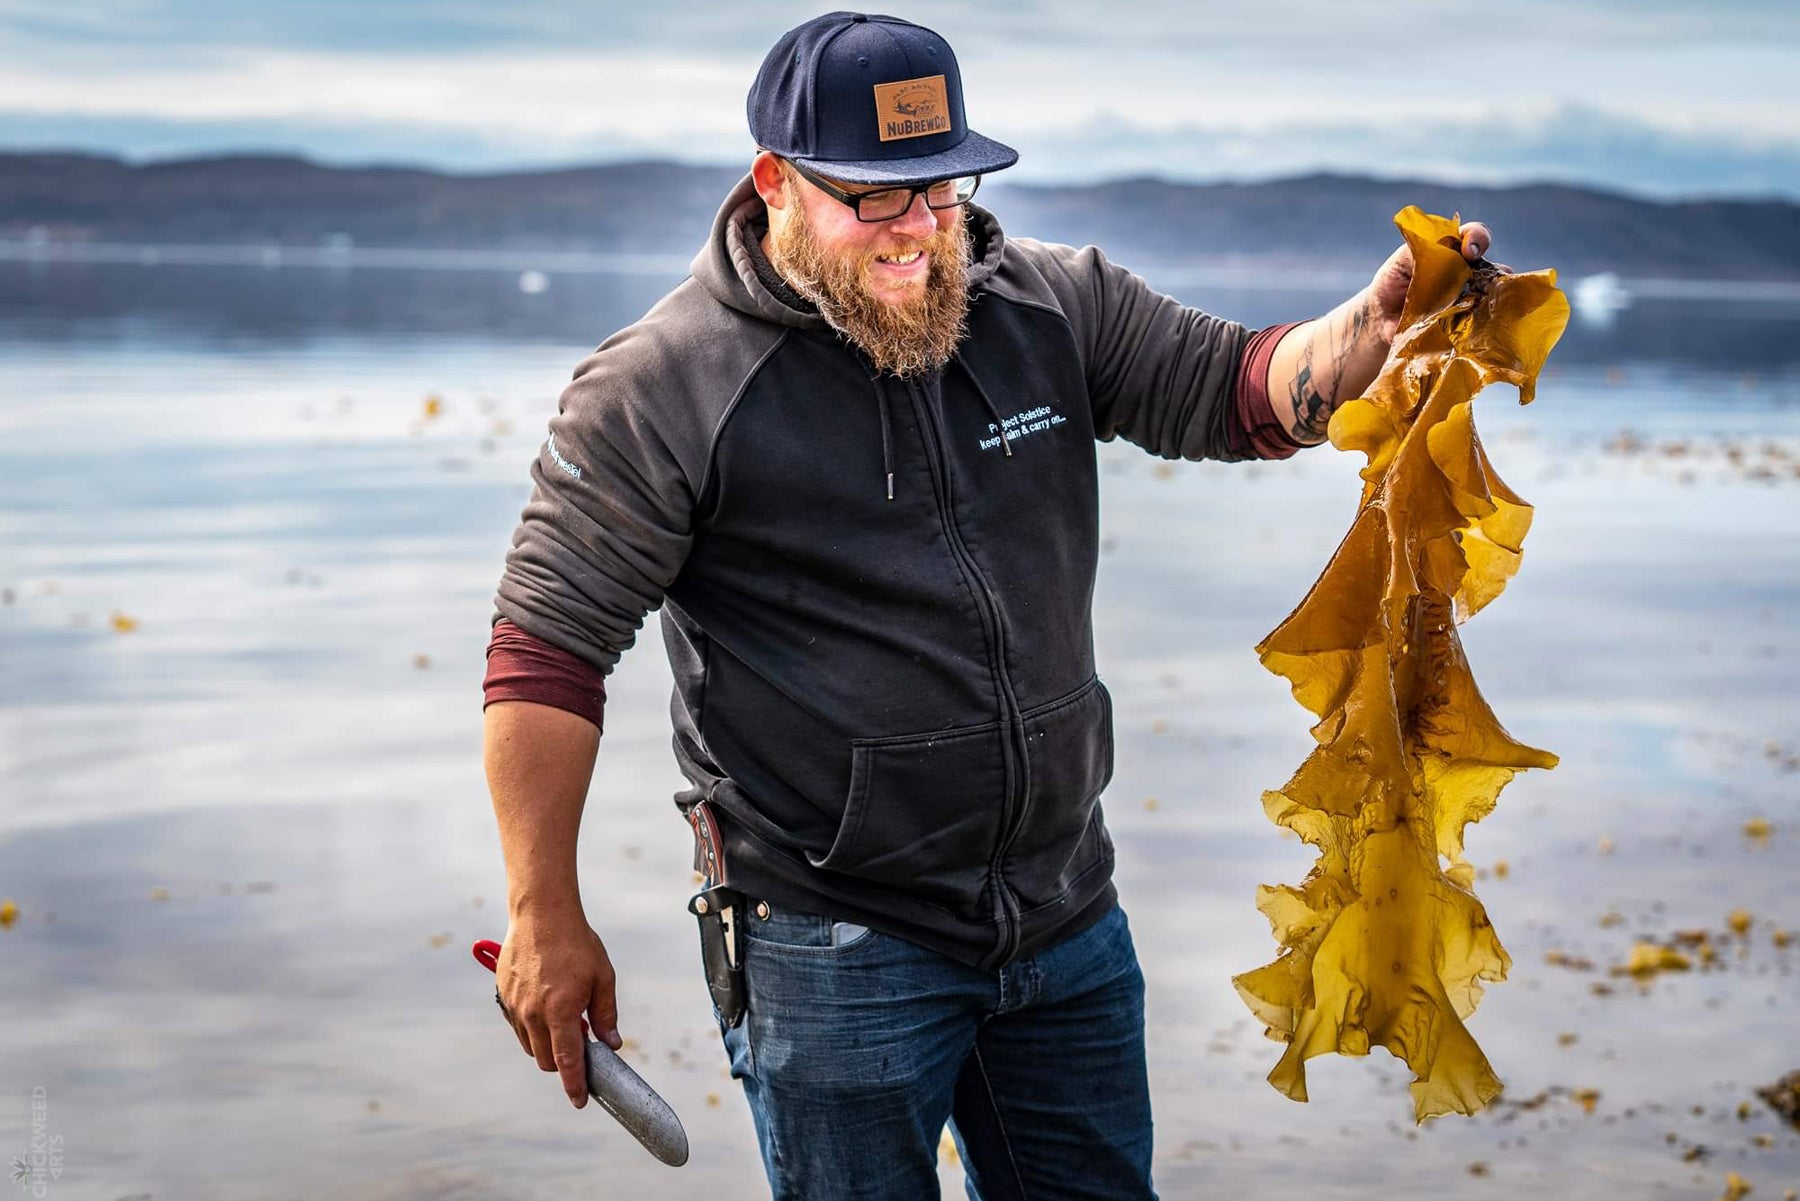 Photograph of Justin Clarke of UasaU Soap, smiling at the large piece of seaweed that he's recently foraged in Nunavut, where UasaU soap is produced. 